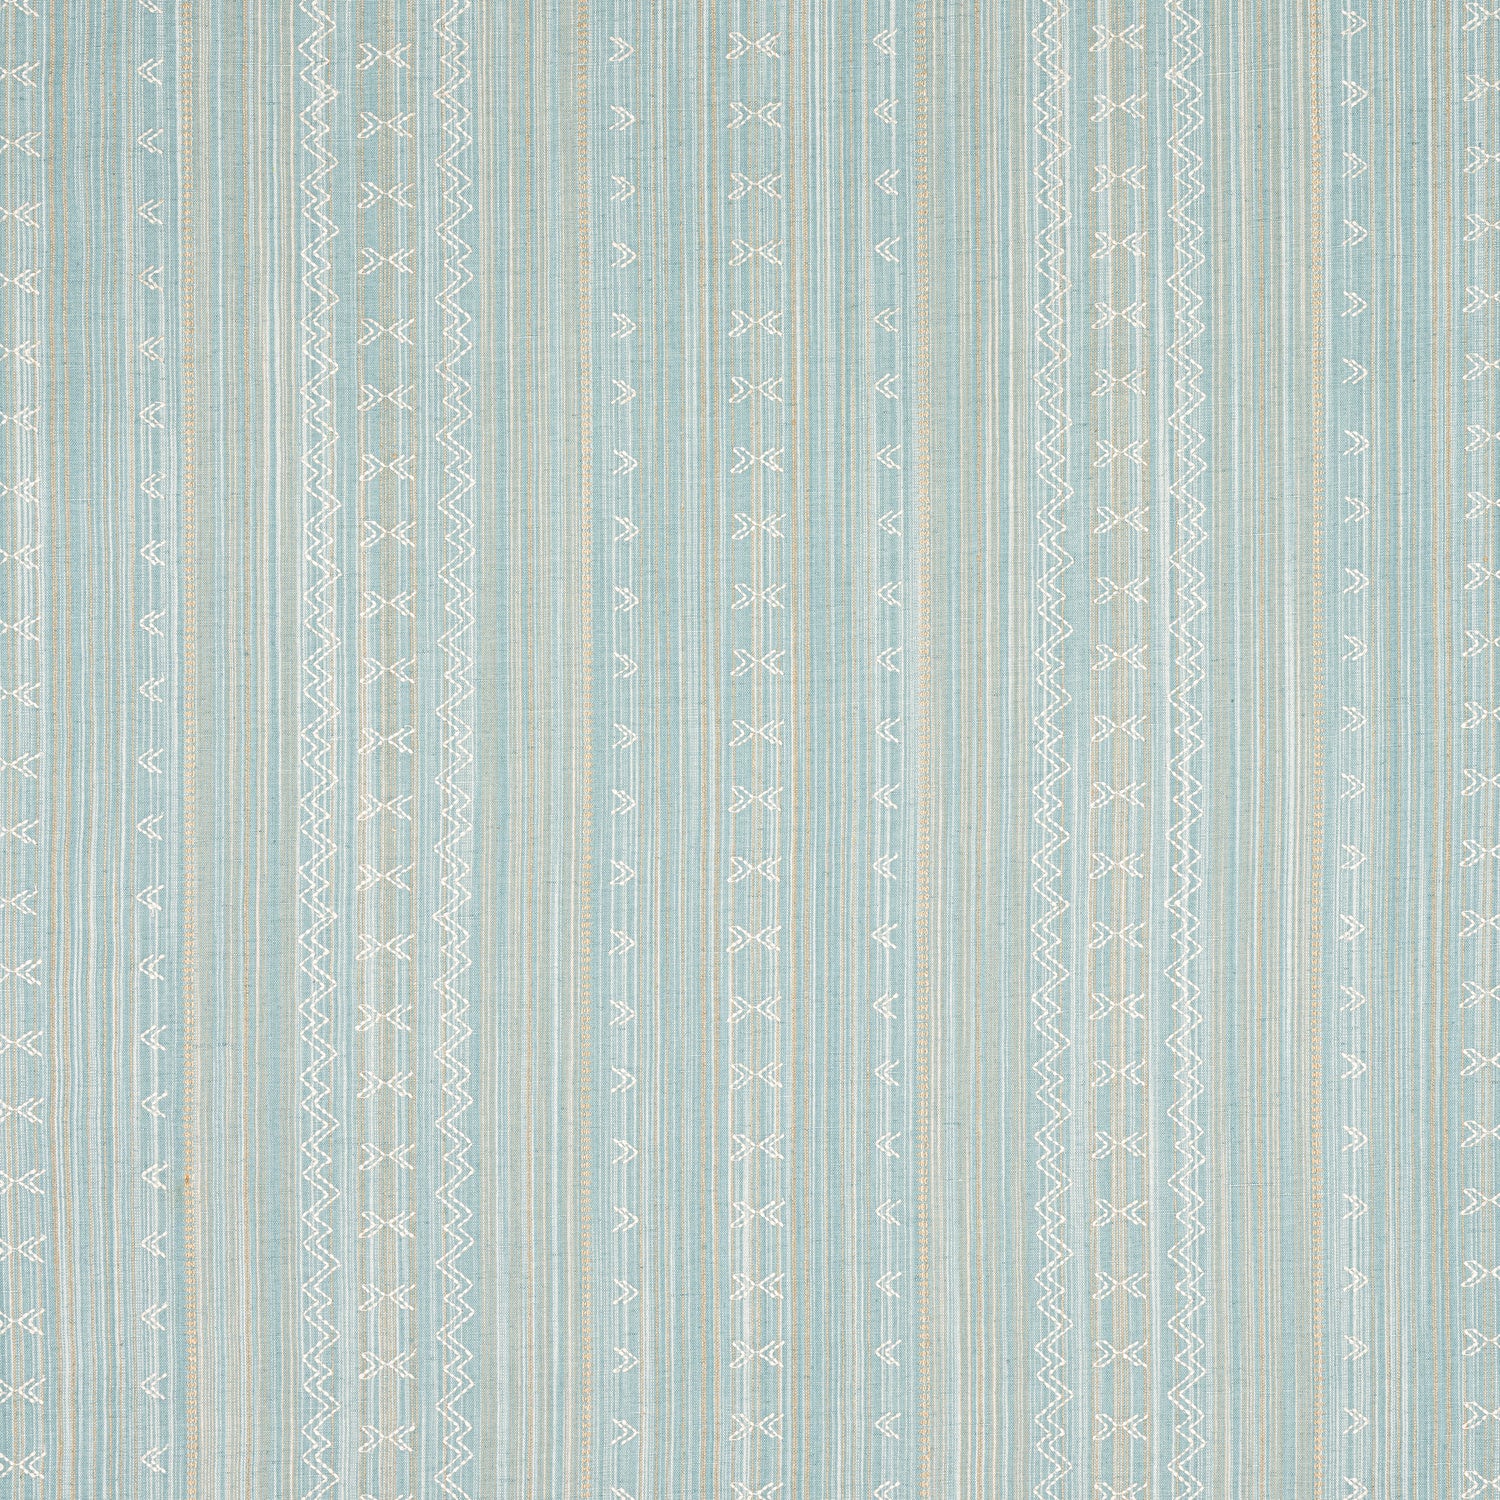 Charter Stripe Embroidery fabric in seaglass color - pattern number W736455 - by Thibaut in the Indienne collection